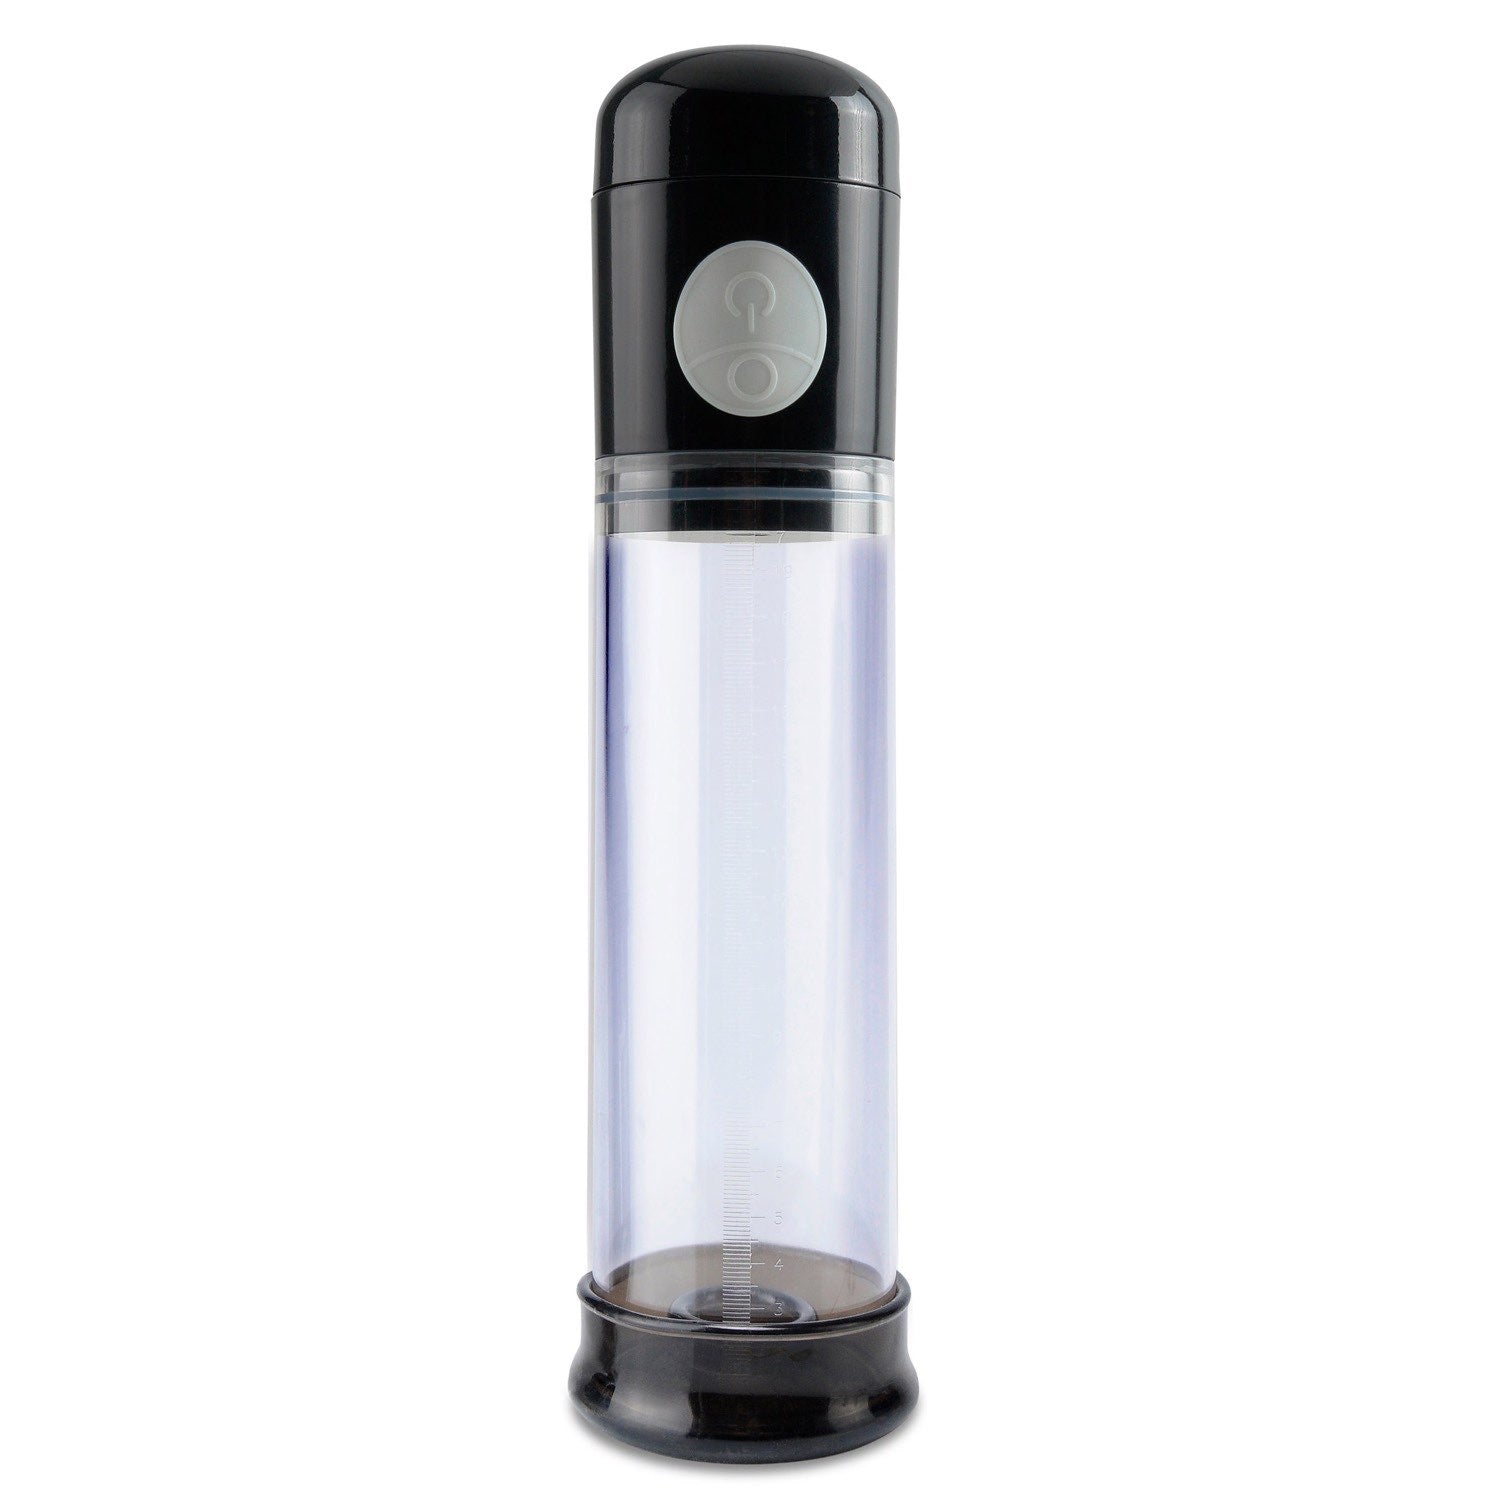 Pump Worx Auto-vac Power Pump - Black/Clear Automatic Penis Pump by Pipedream